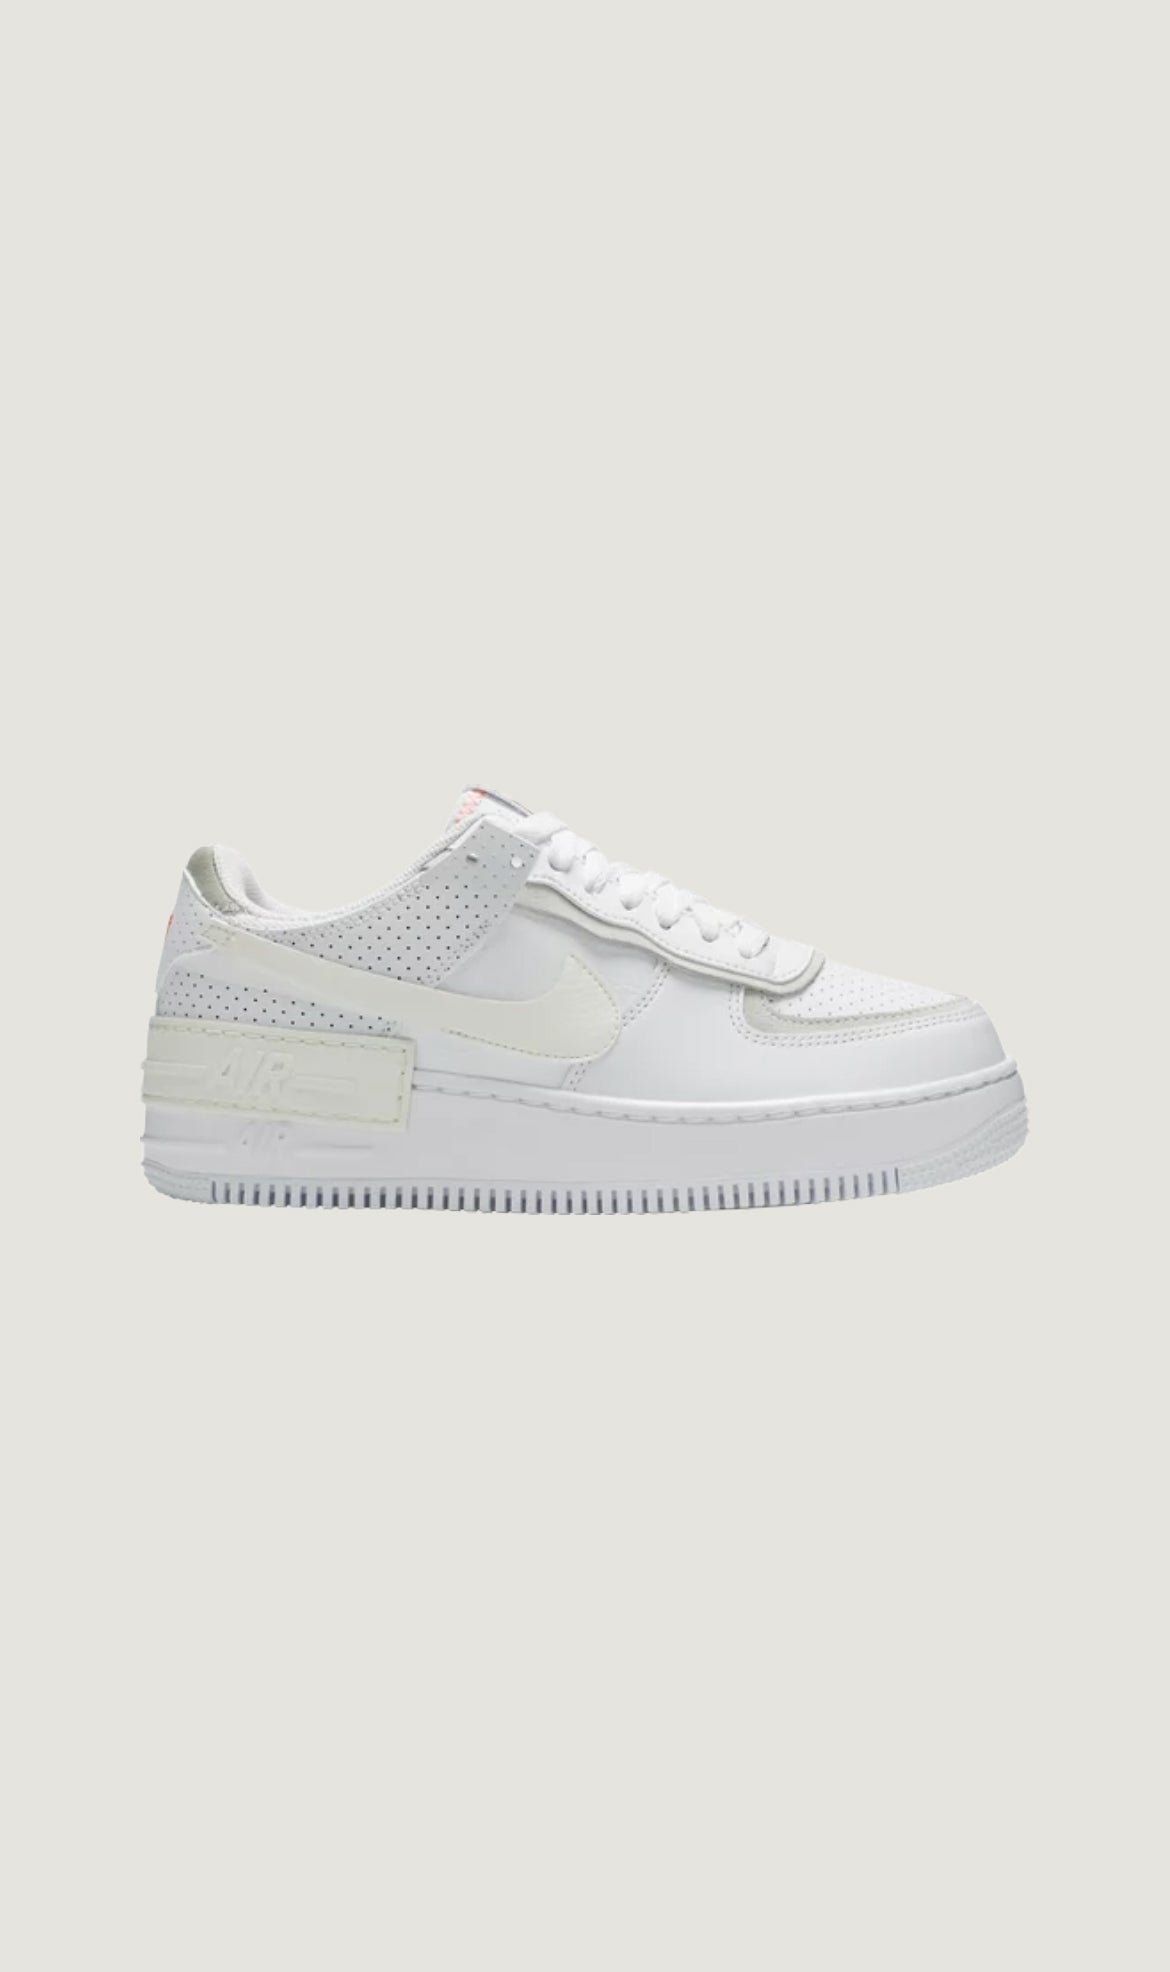 Load image into Gallery viewer, WMNS AIR FORCE 1 SHADOW - WHITE ATOMIC PINK
